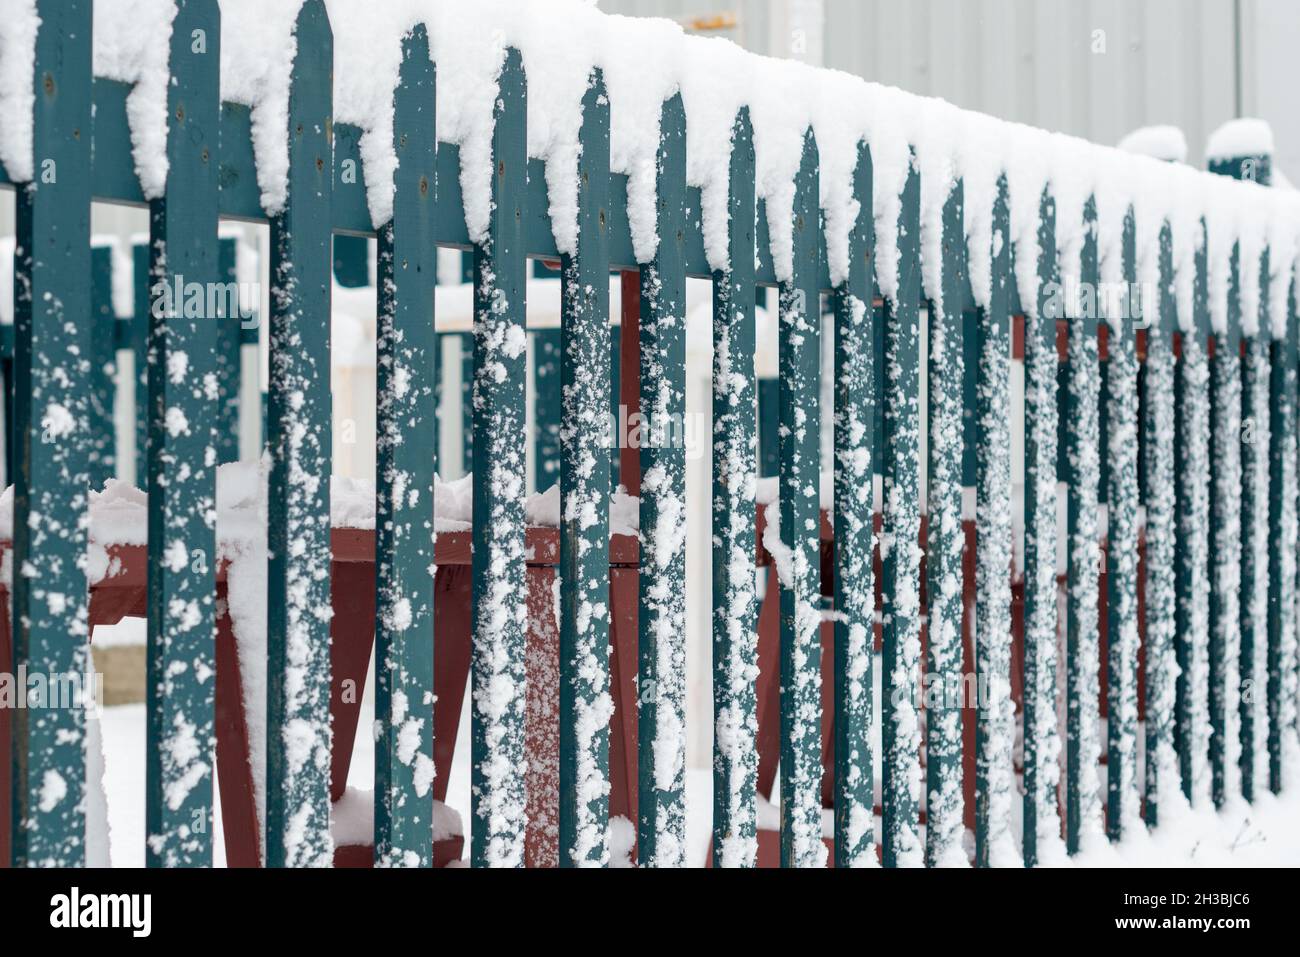 A dark green wood picket fence separating a road and field is covered in fresh white snow.  The ground is covered in fresh snow and large snowflakes. Stock Photo